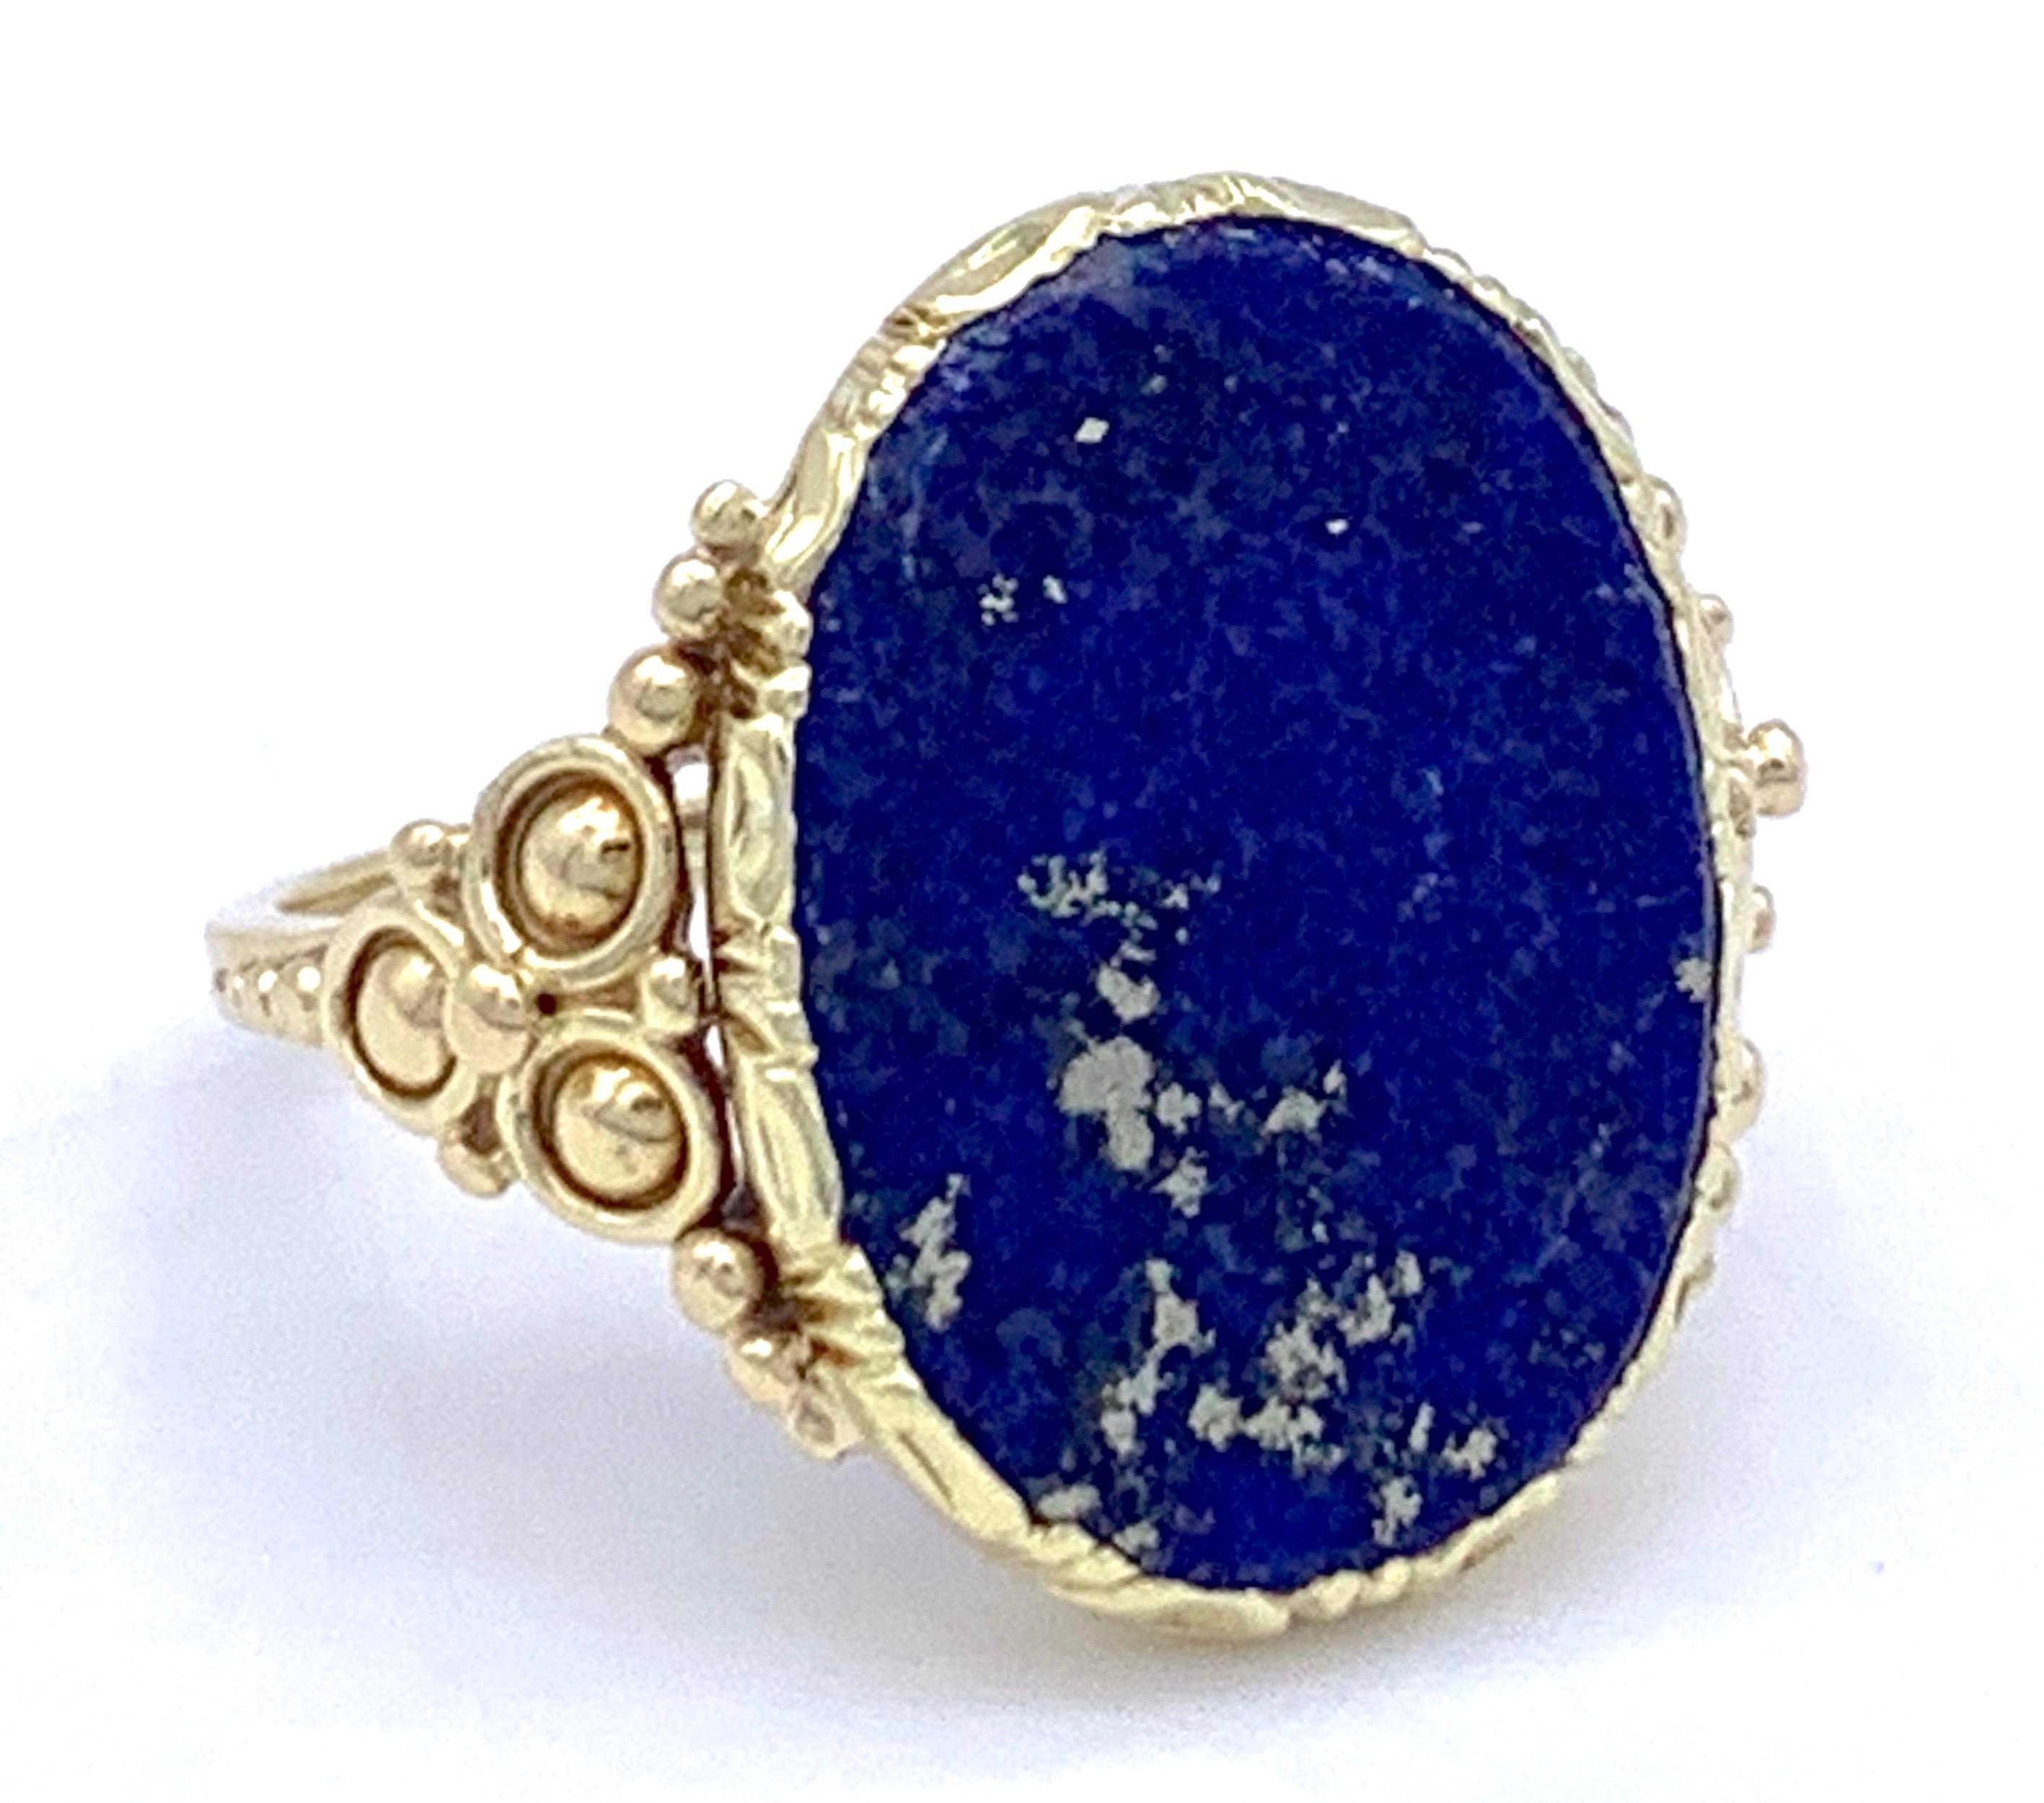 The elegant late Art Nouveau lapis lazuli signet ring is made out of 14 k gold. The oval lapis plaque has natural silver and gold inclusions.  ring size: EU 51 / US 5.25